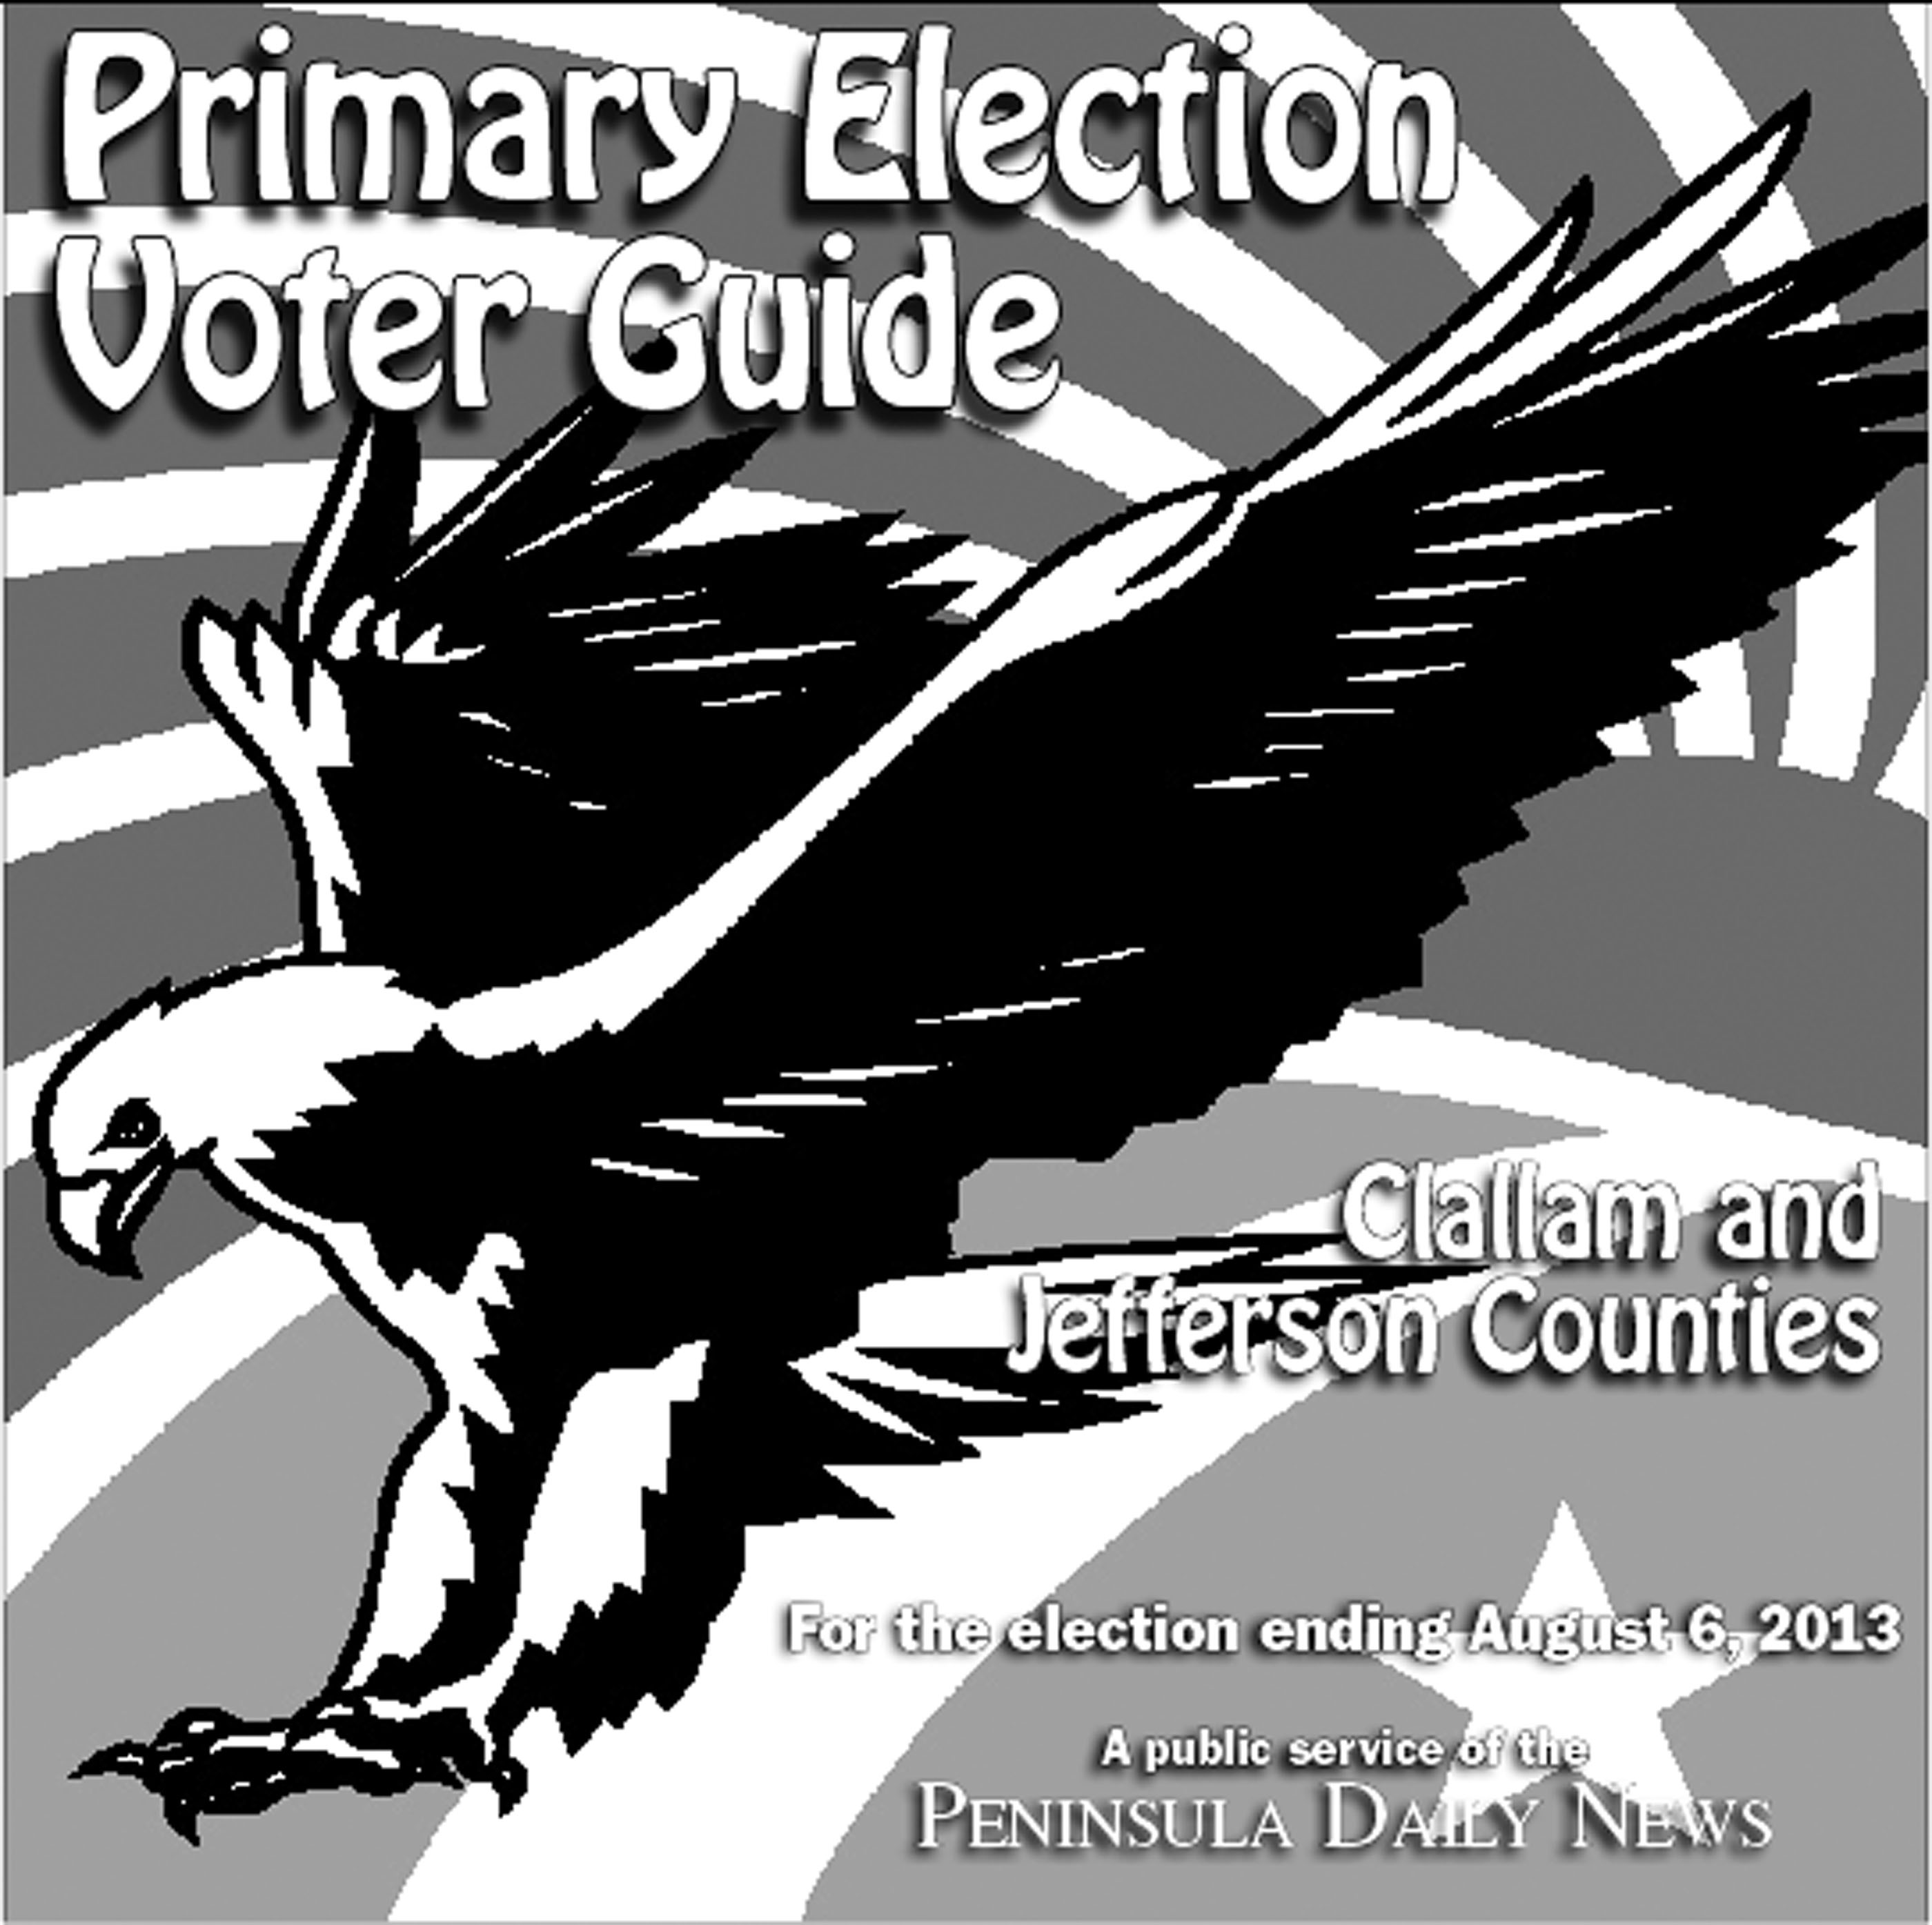 North Olympic Peninsula Primary Election Voter Guide now available